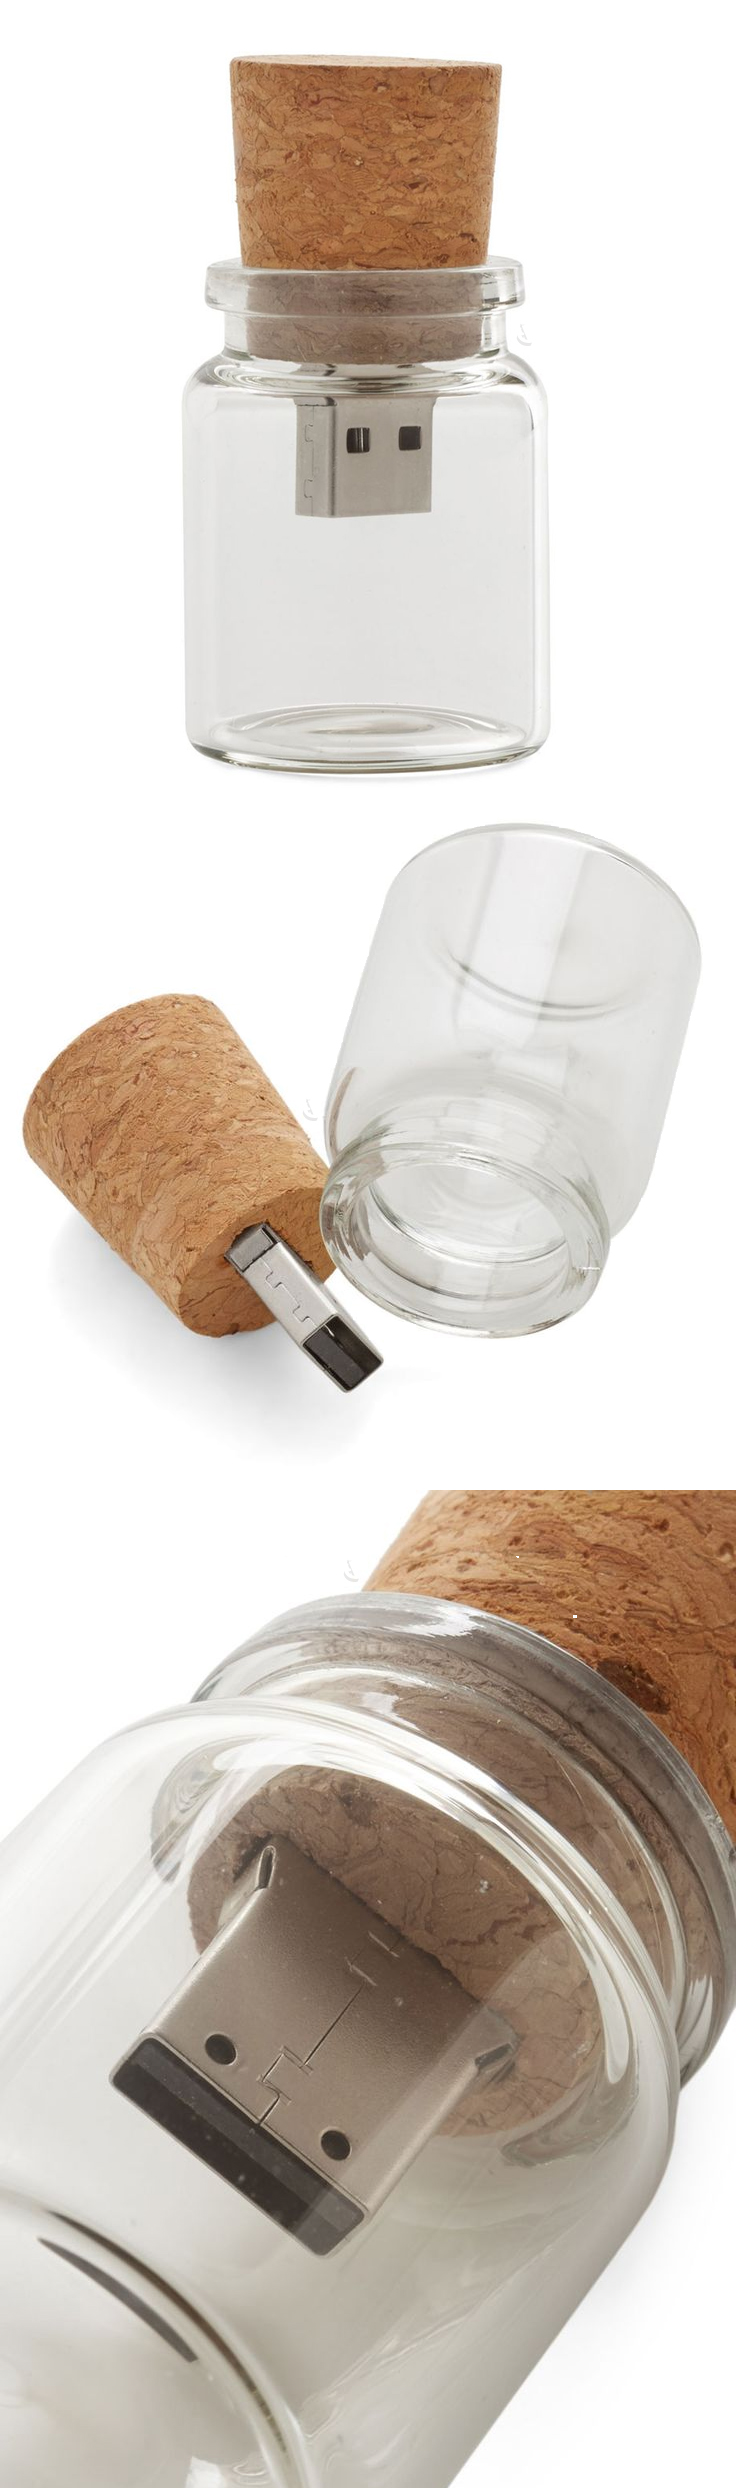 USB message in a bottle #product_design #geek